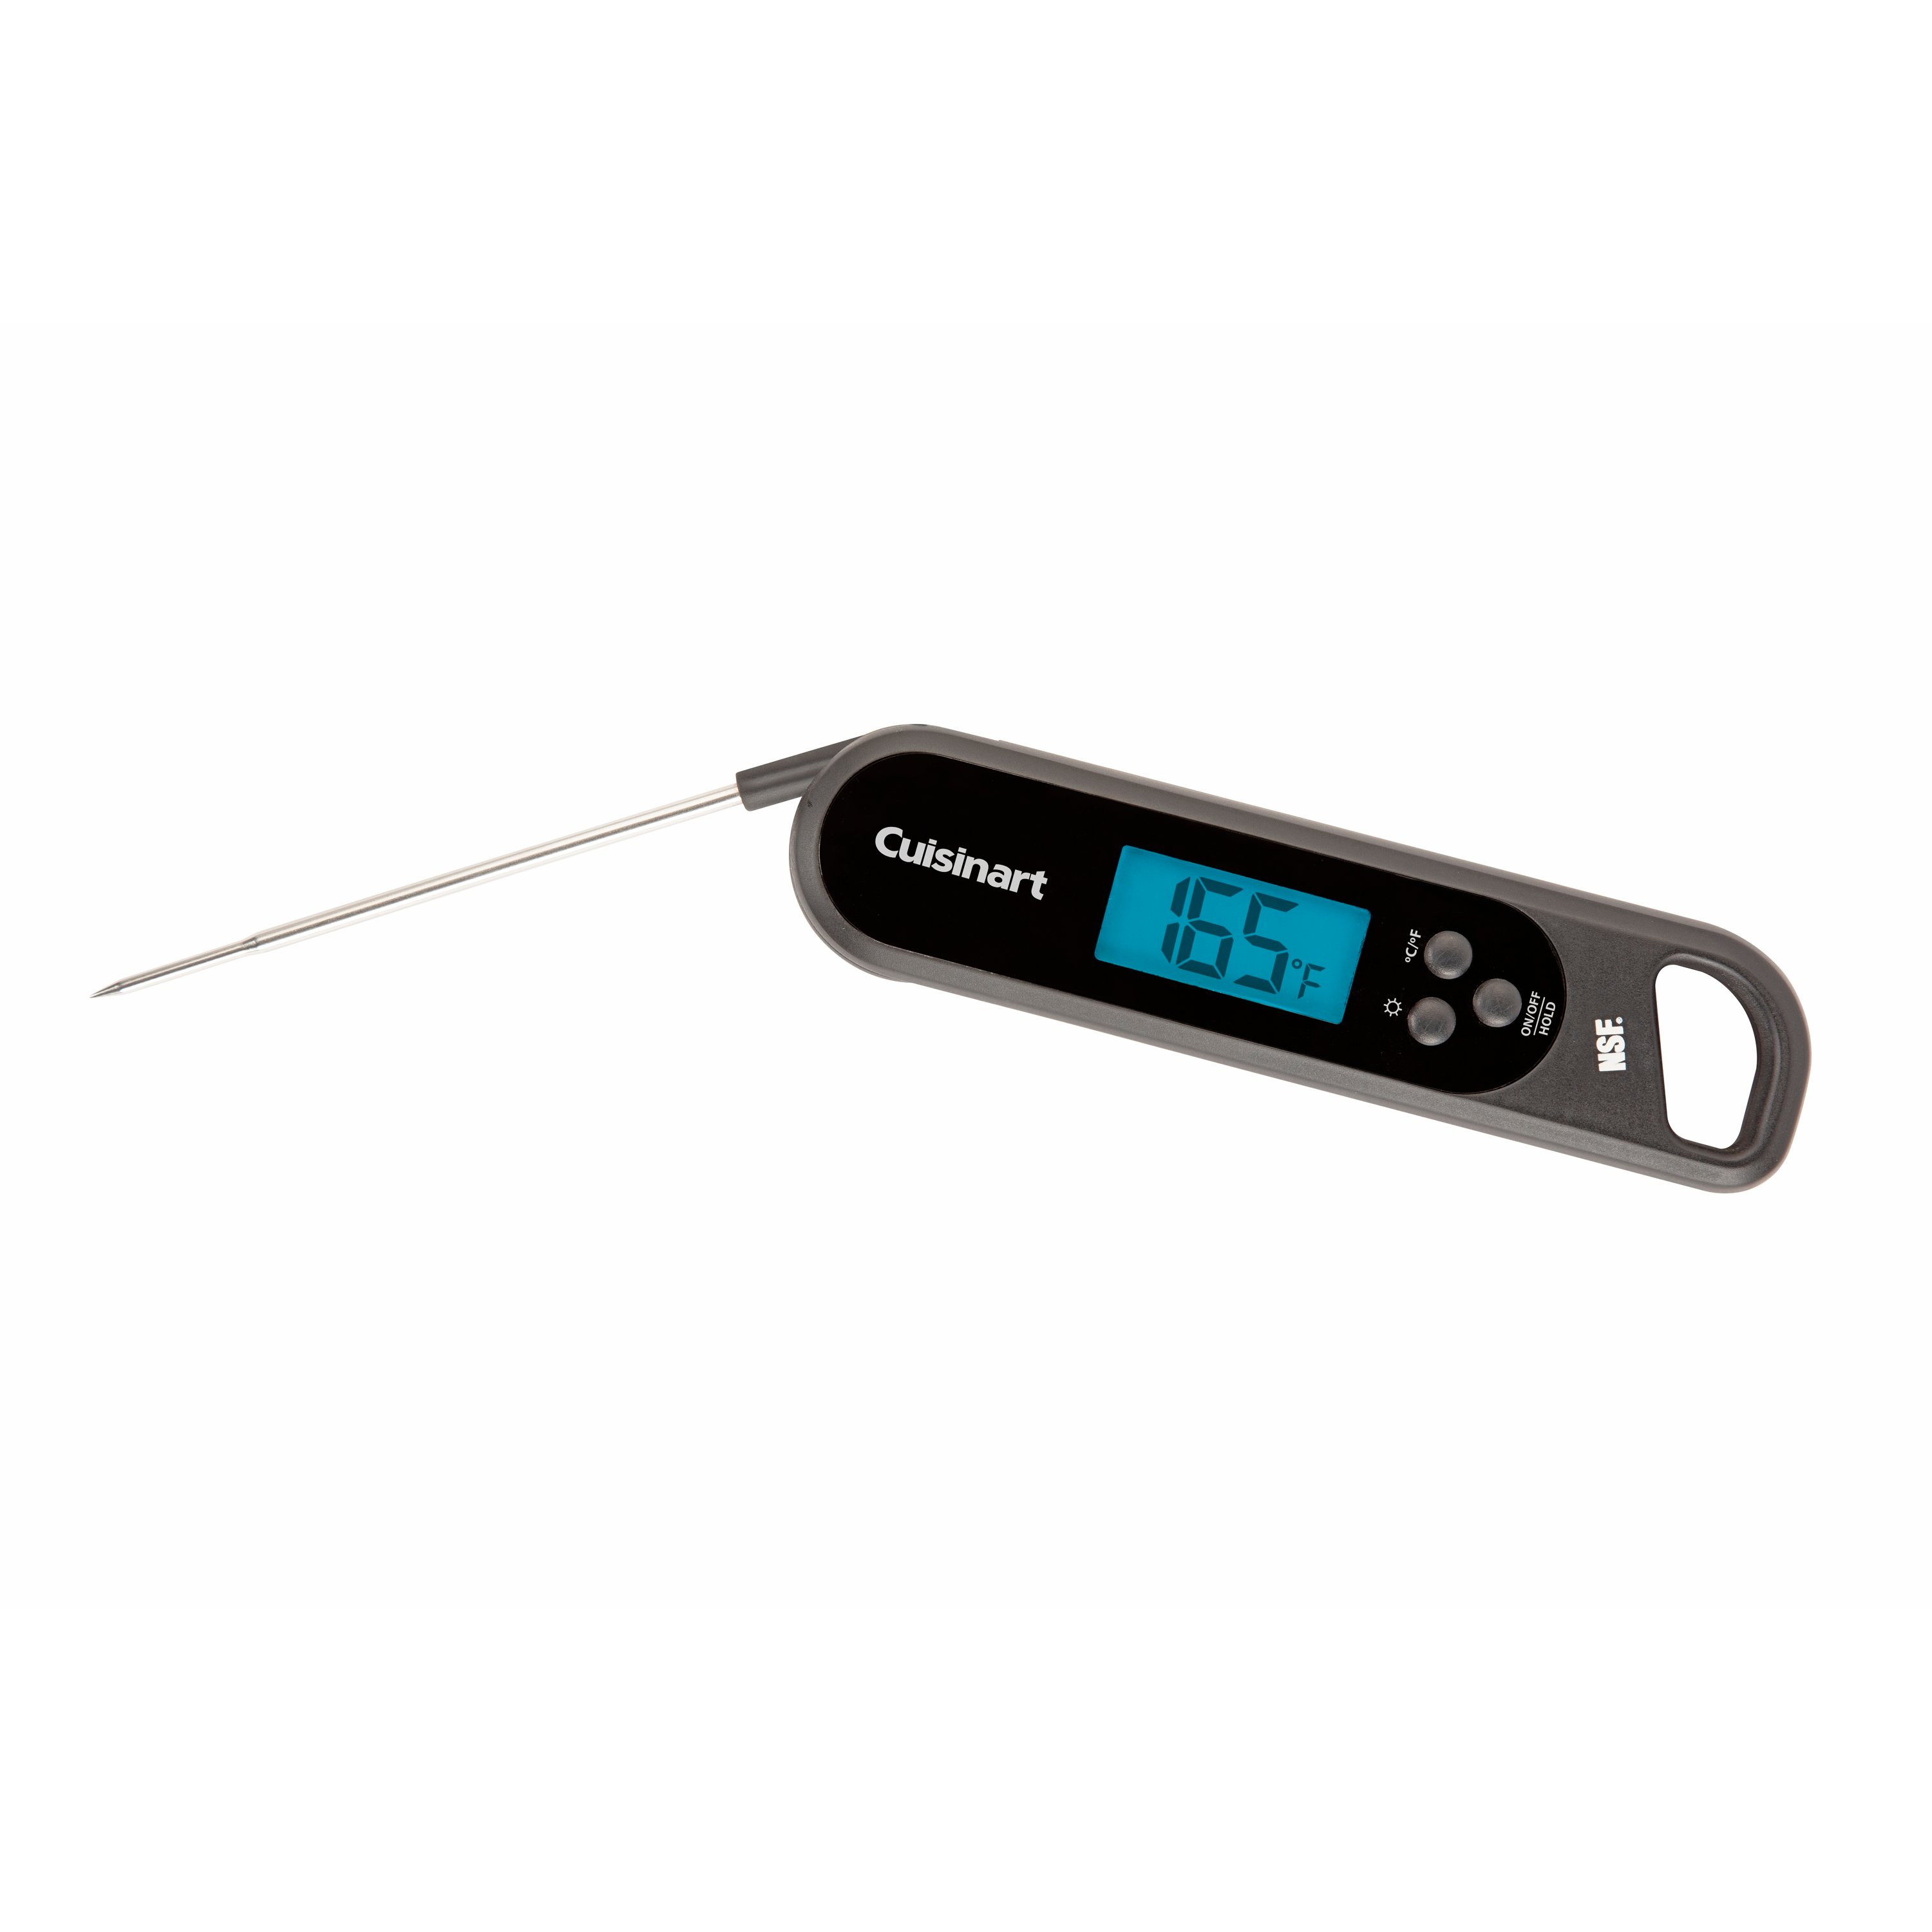 3.5 Dial Quick Read Meat Thermometer for Cooking - NSF Approved